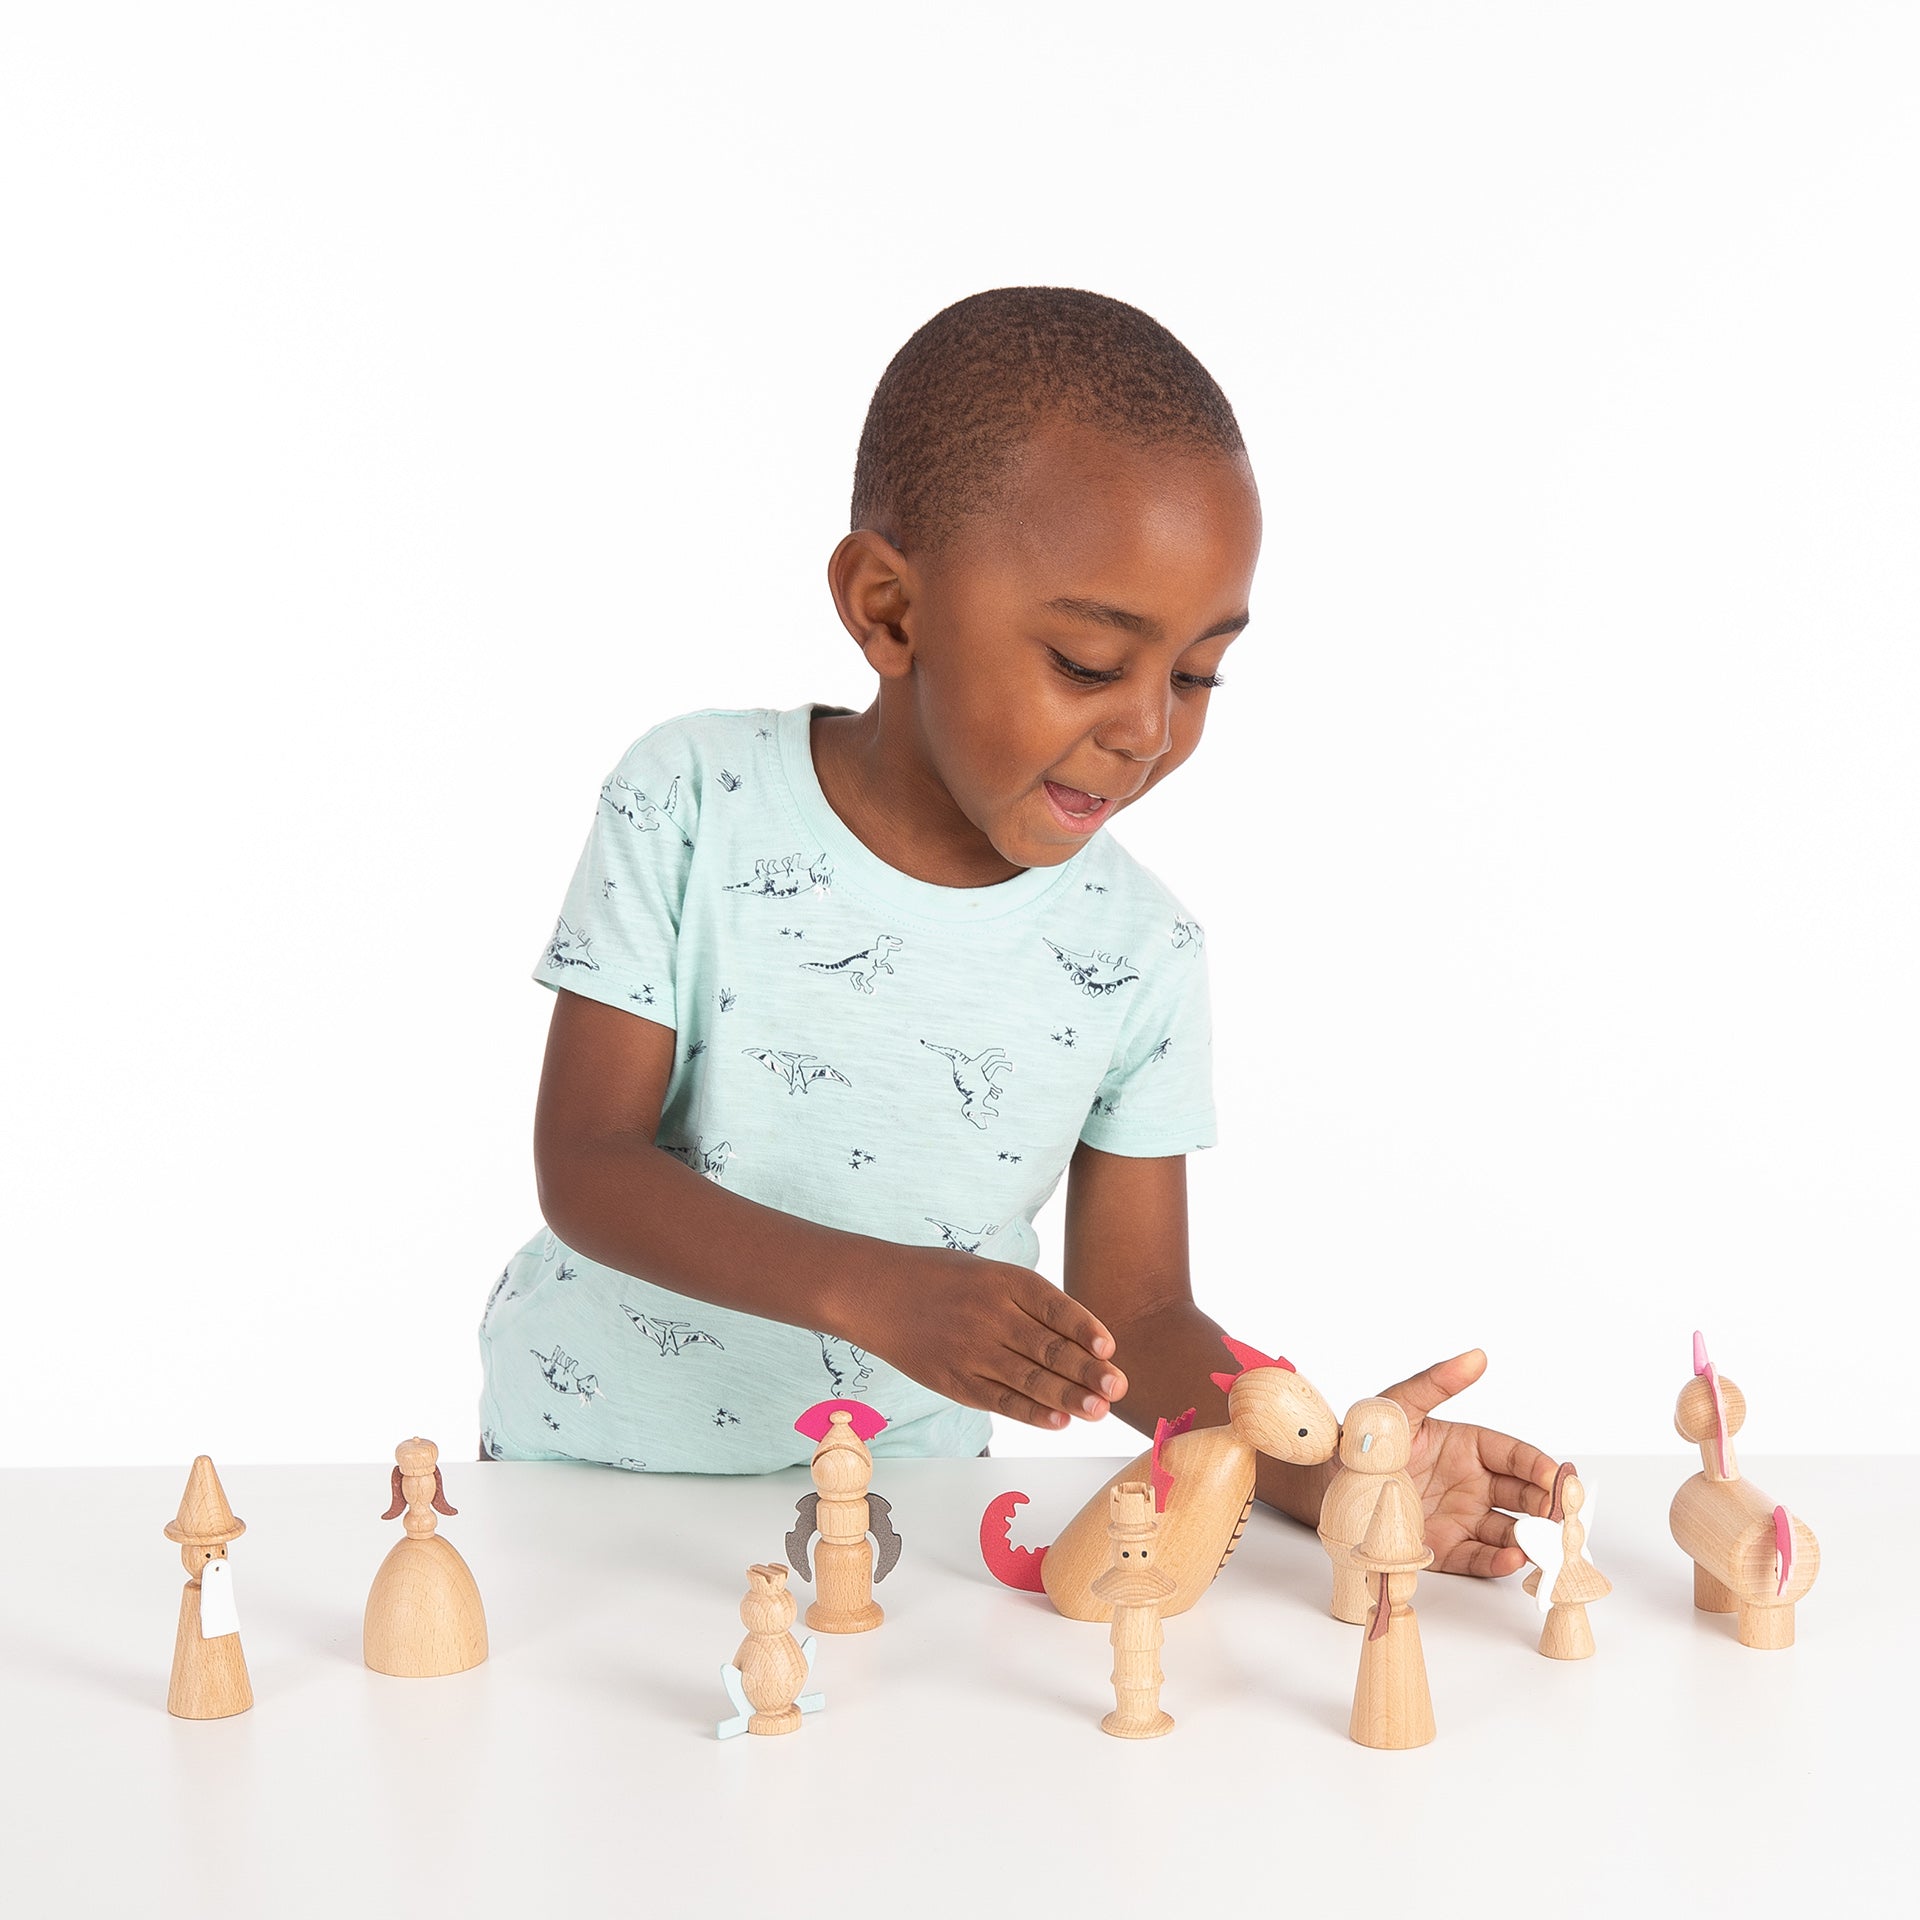 Wooden Enchanted Figures, Your child will love creating their own magical fairy tale with our TickiT® Wooden Enchanted Figures. A spellbinding set of 10 characters from traditional fairy stories made from beautiful solid beechwood, including a king, queen, witch, wizard, fairy, knight, dragon, unicorn, frog-prince and ogre. Natural and smooth with simple printed features and faux leather embellishments, these charming figures are fun and tactile. Your child can use them in imaginative play, small world play